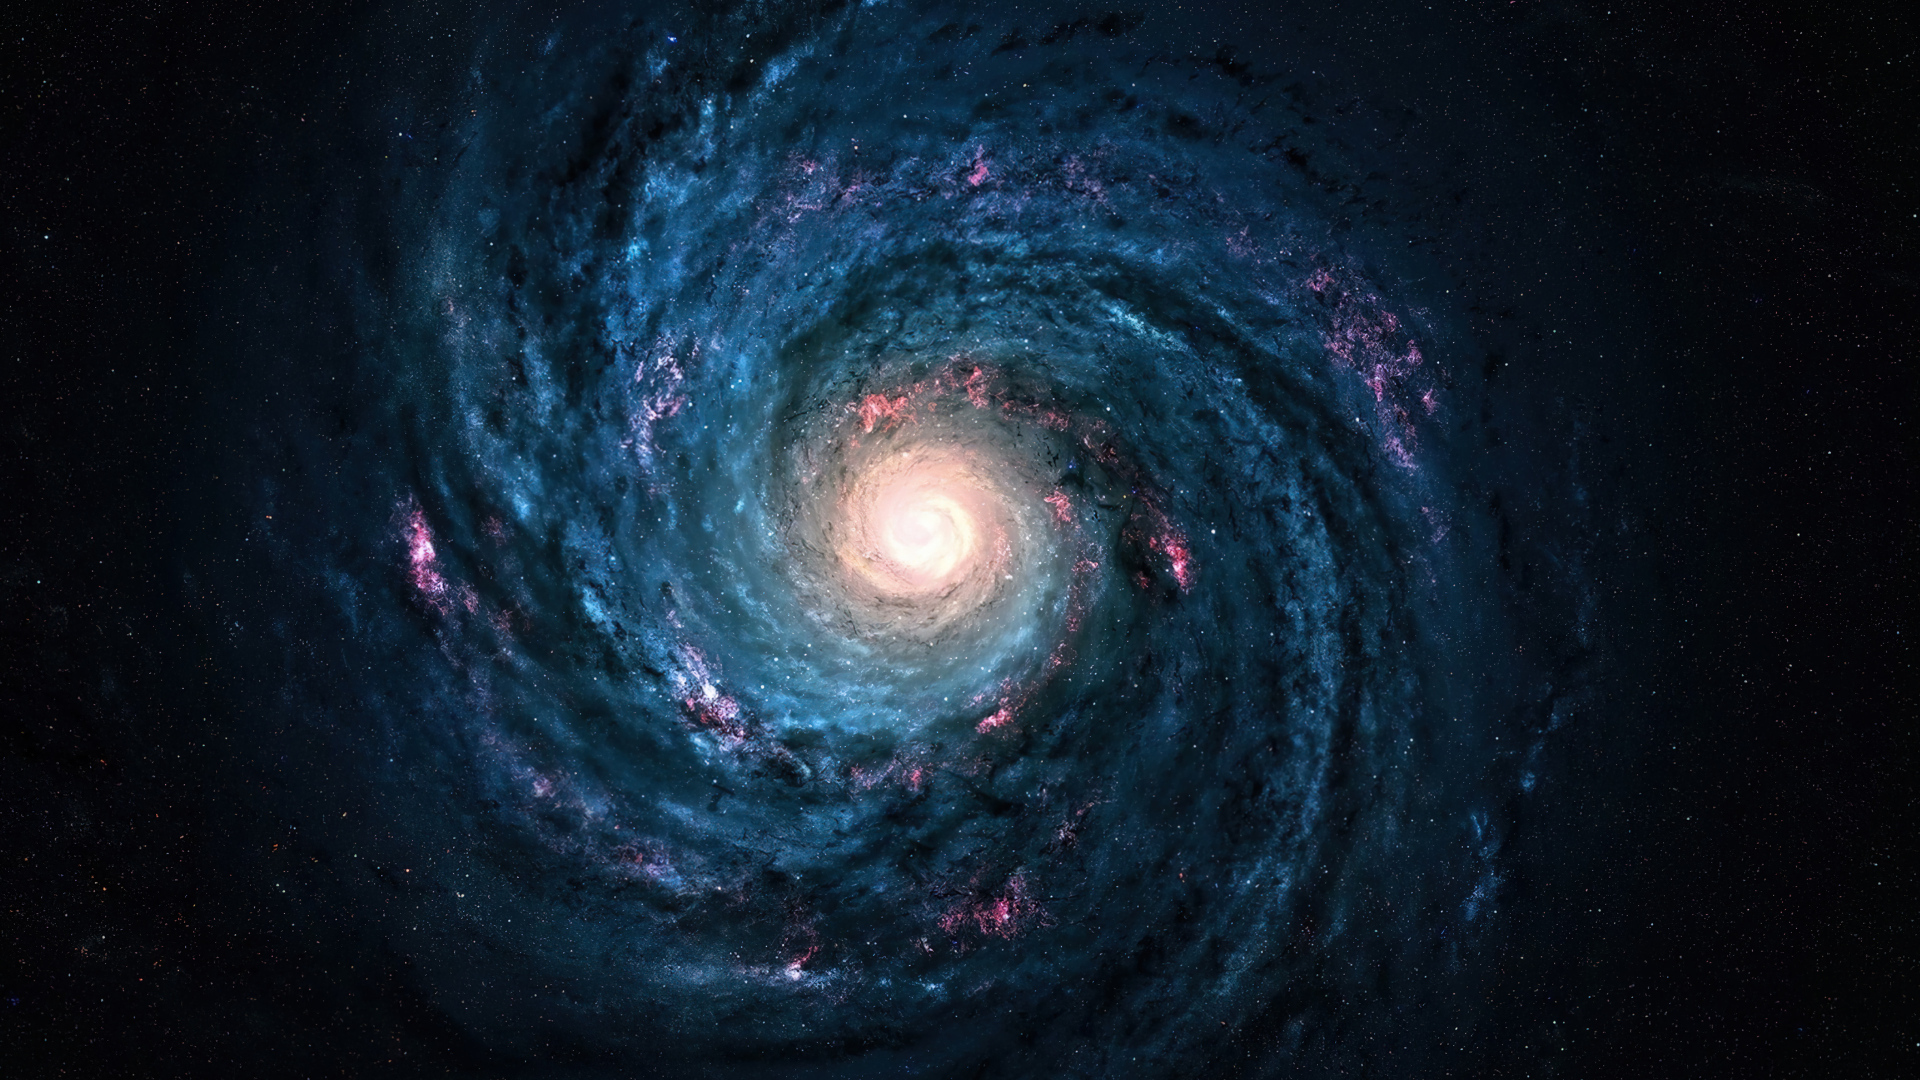 Cosmic spiral with bright core